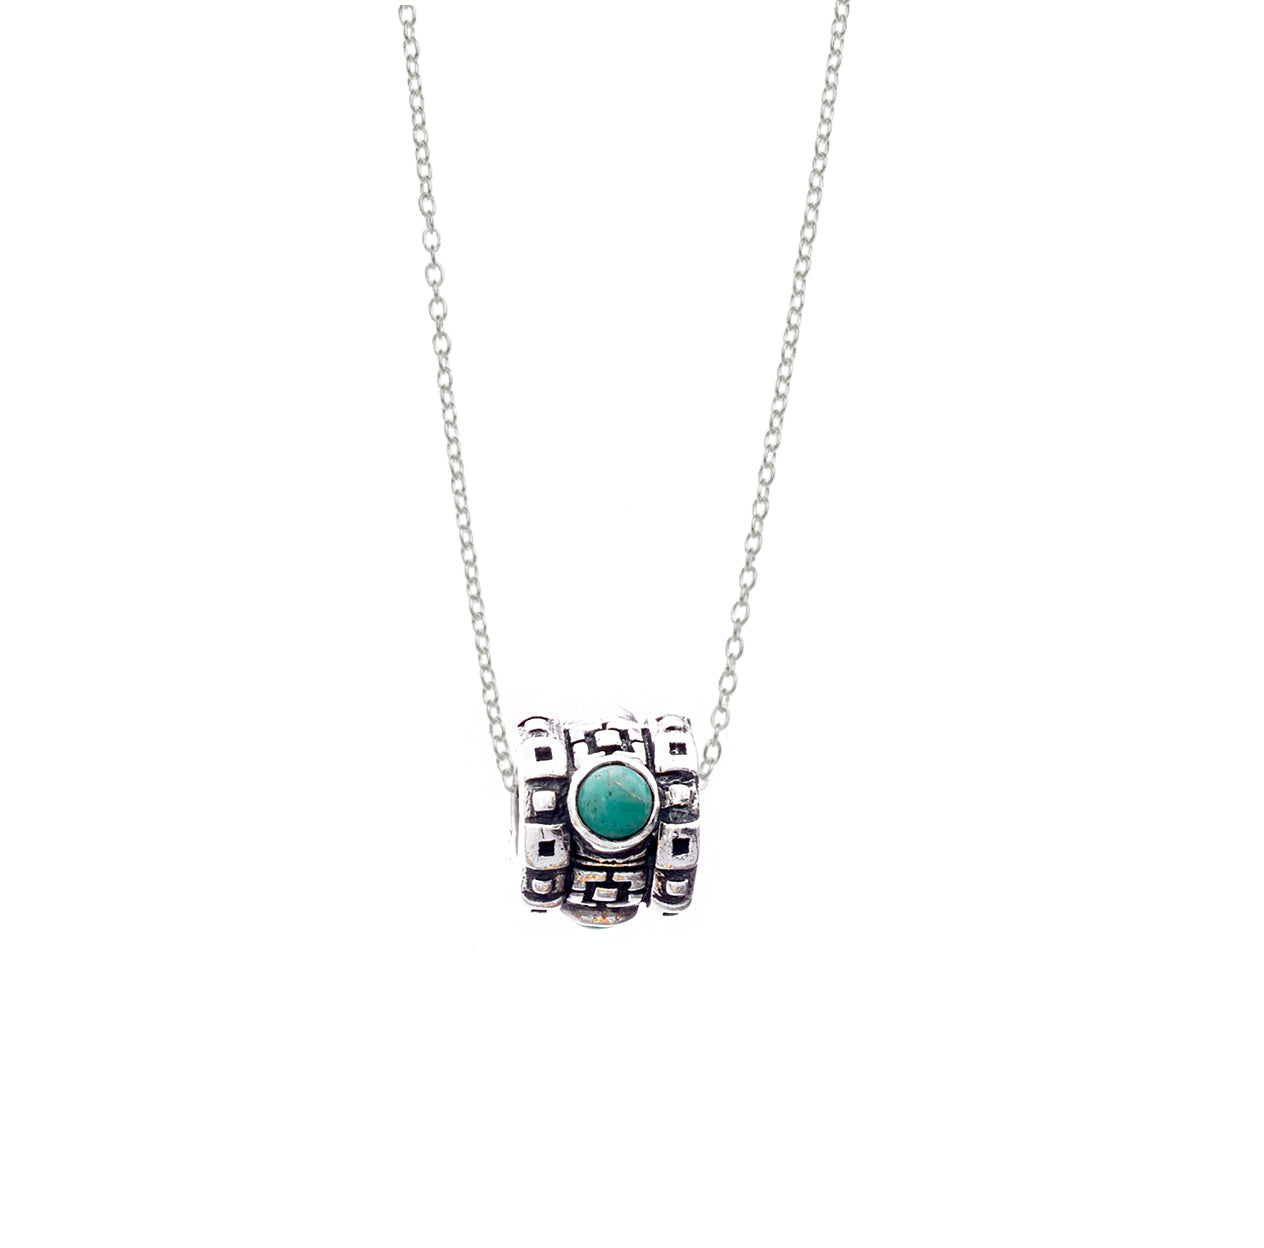 December Turquoise Sterling Silver Bead